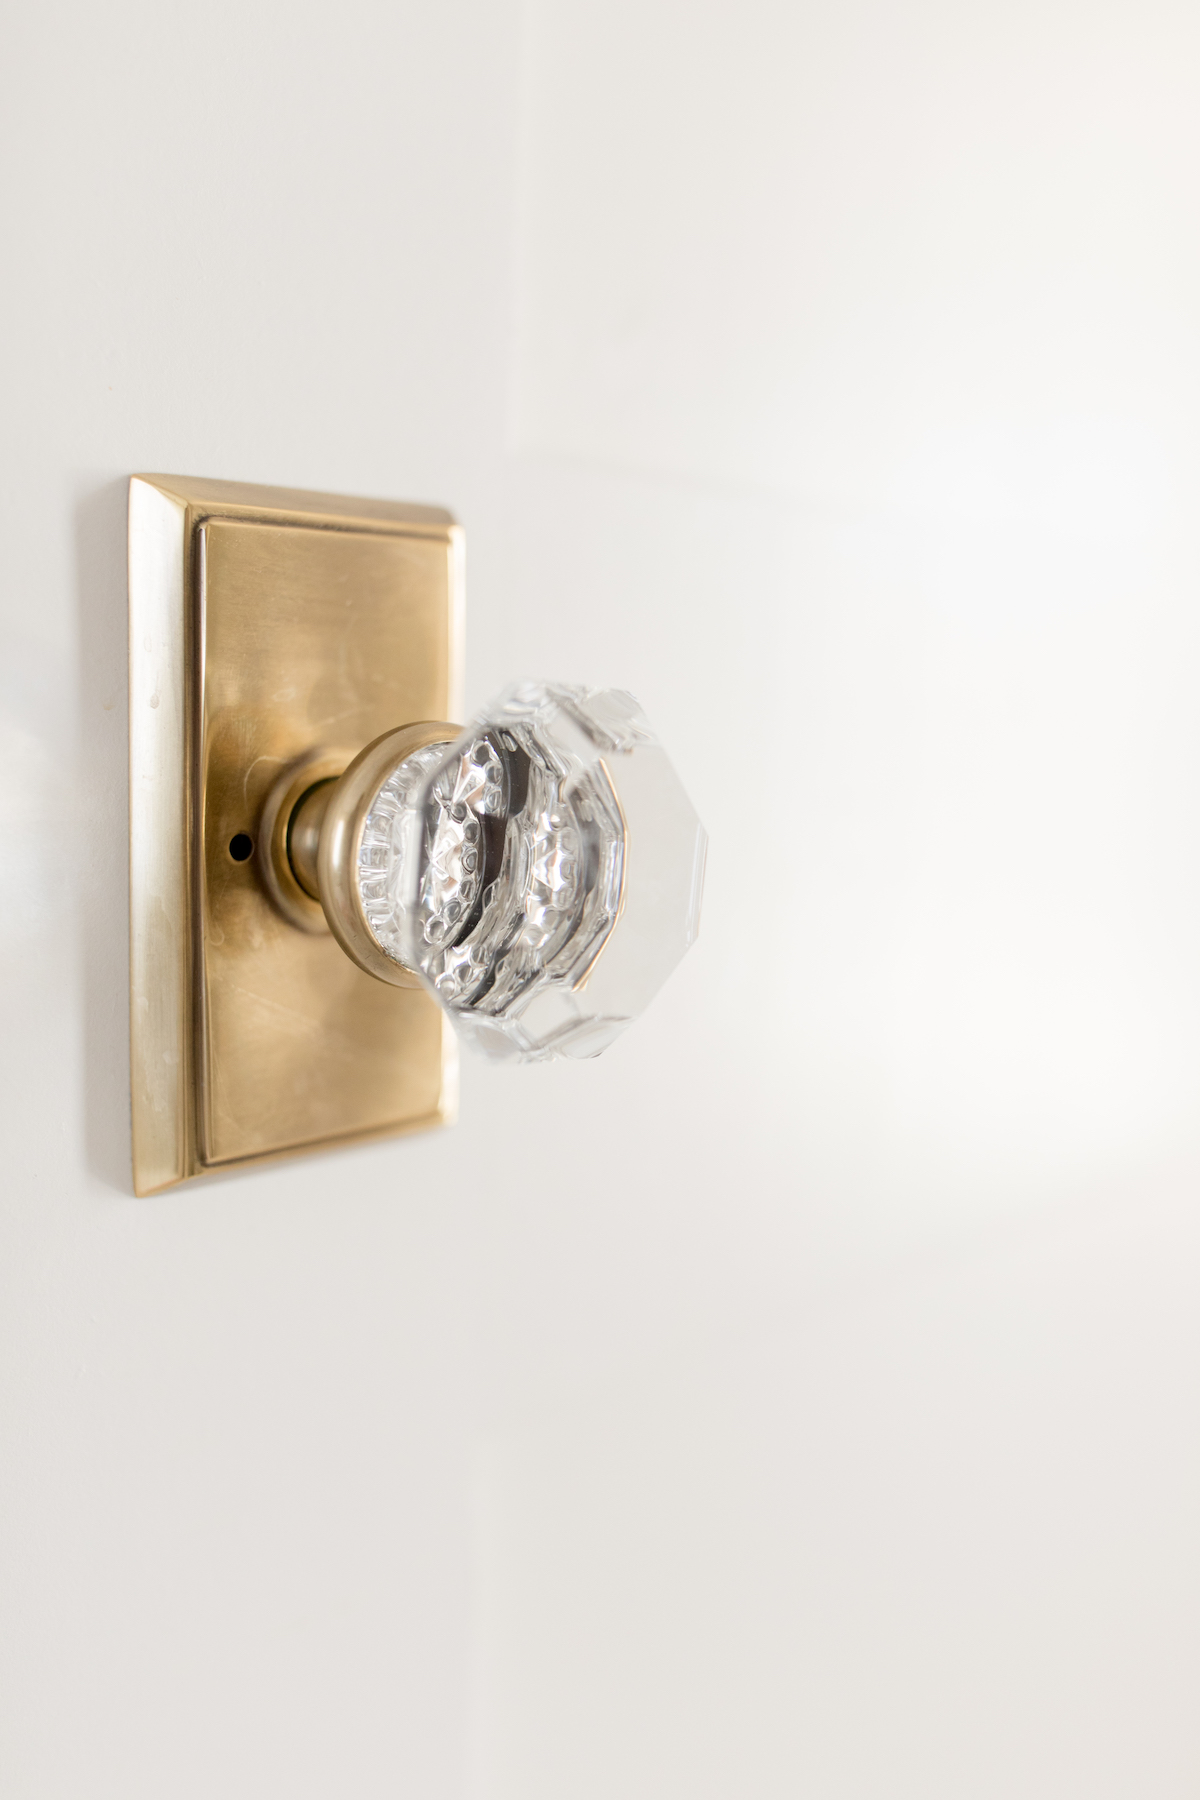 A brass and glass door knob on a white door